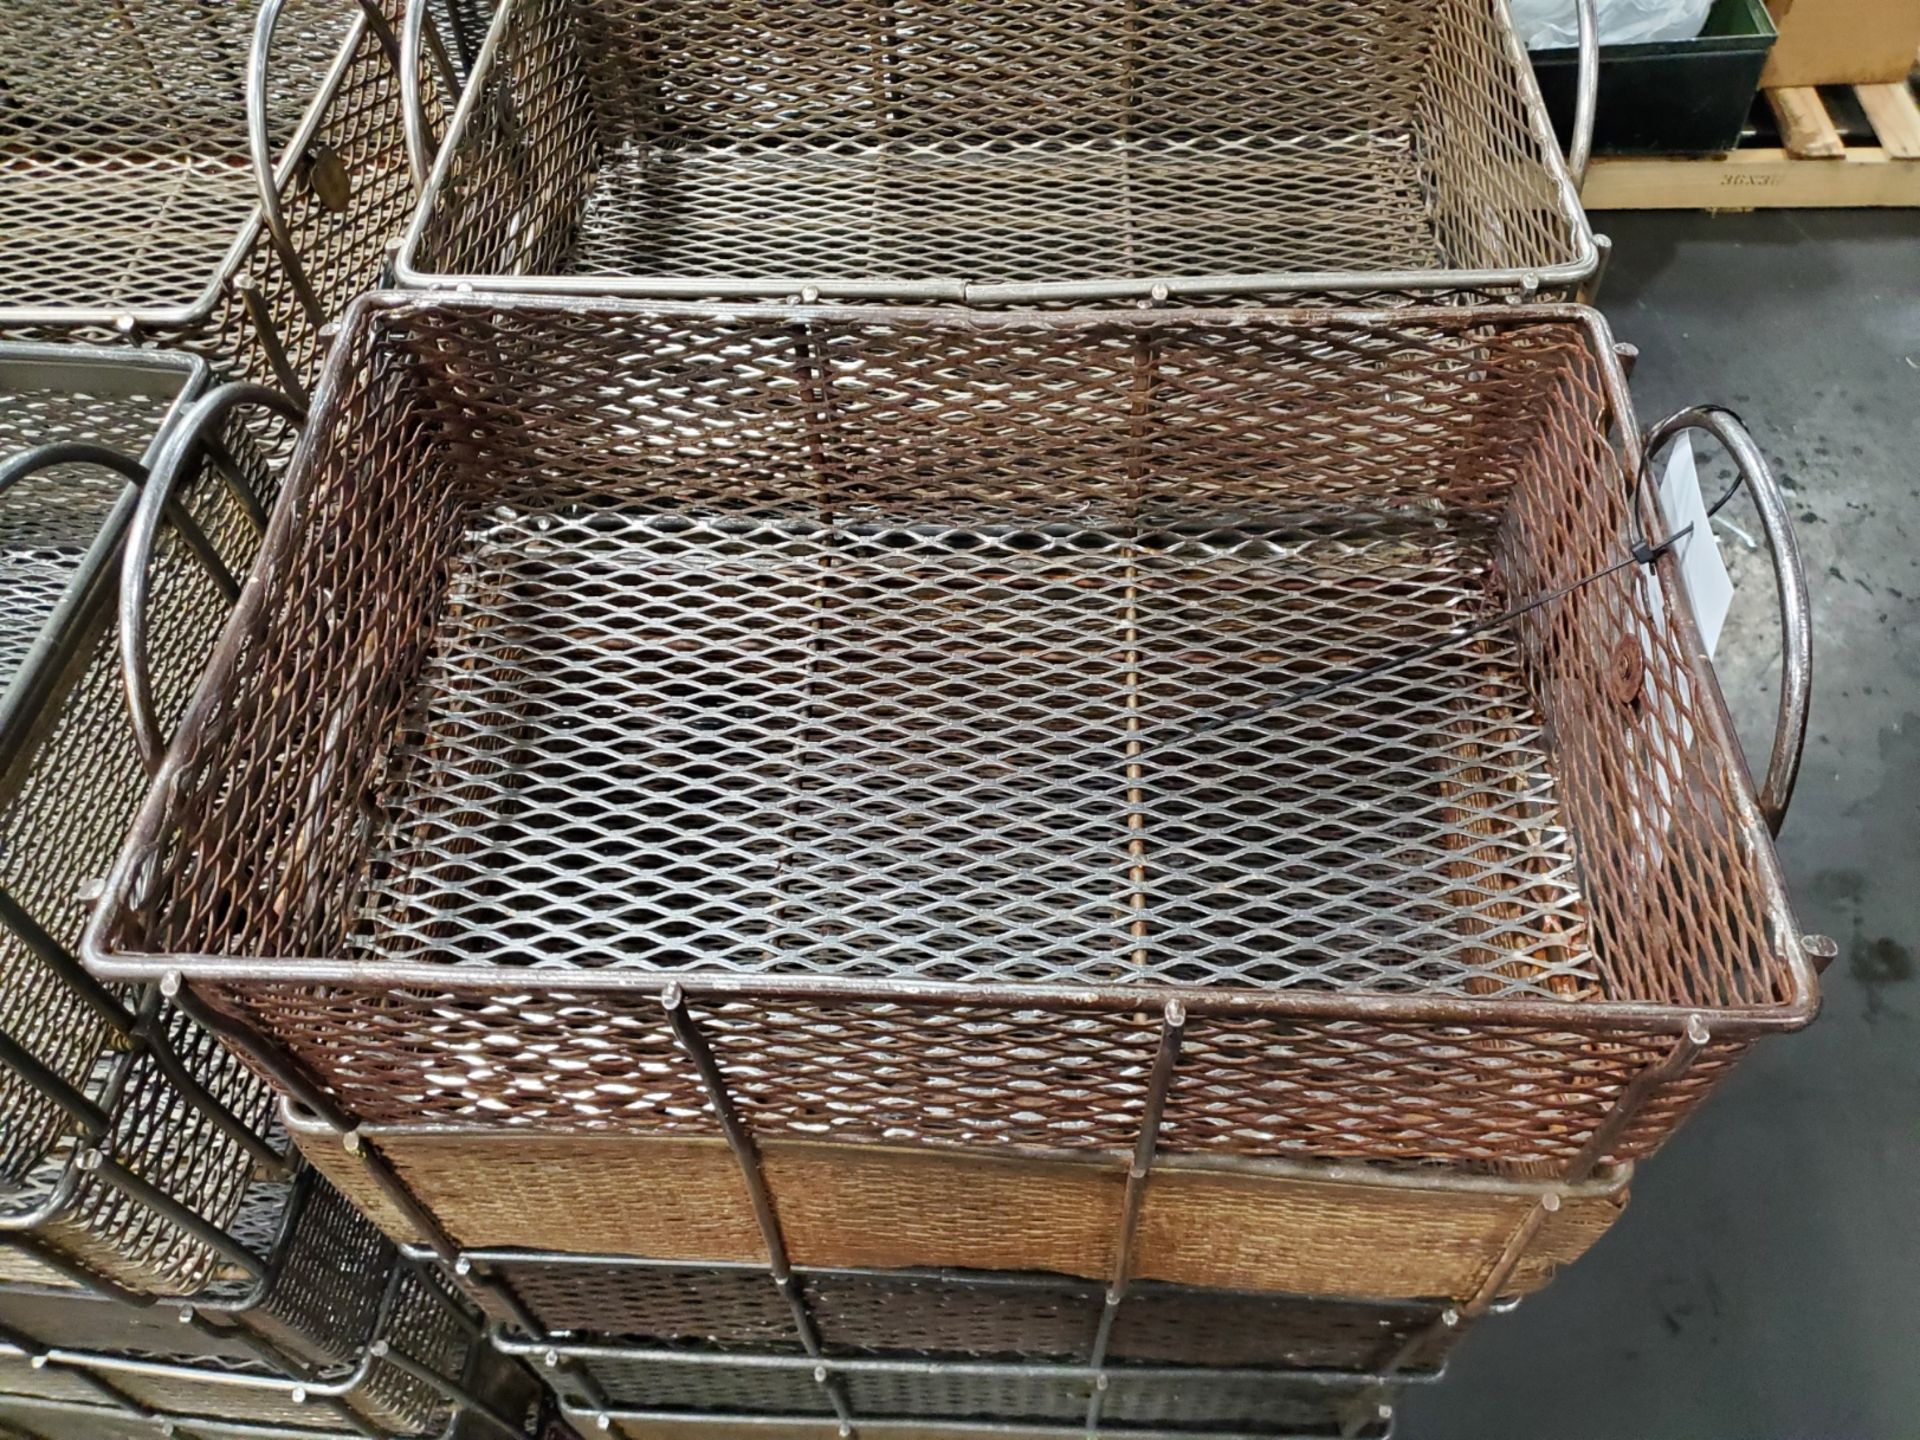 Lot of (133) 12" x 20" x 5 1/2" Steel Mesh Stackable Baskets - Image 2 of 2